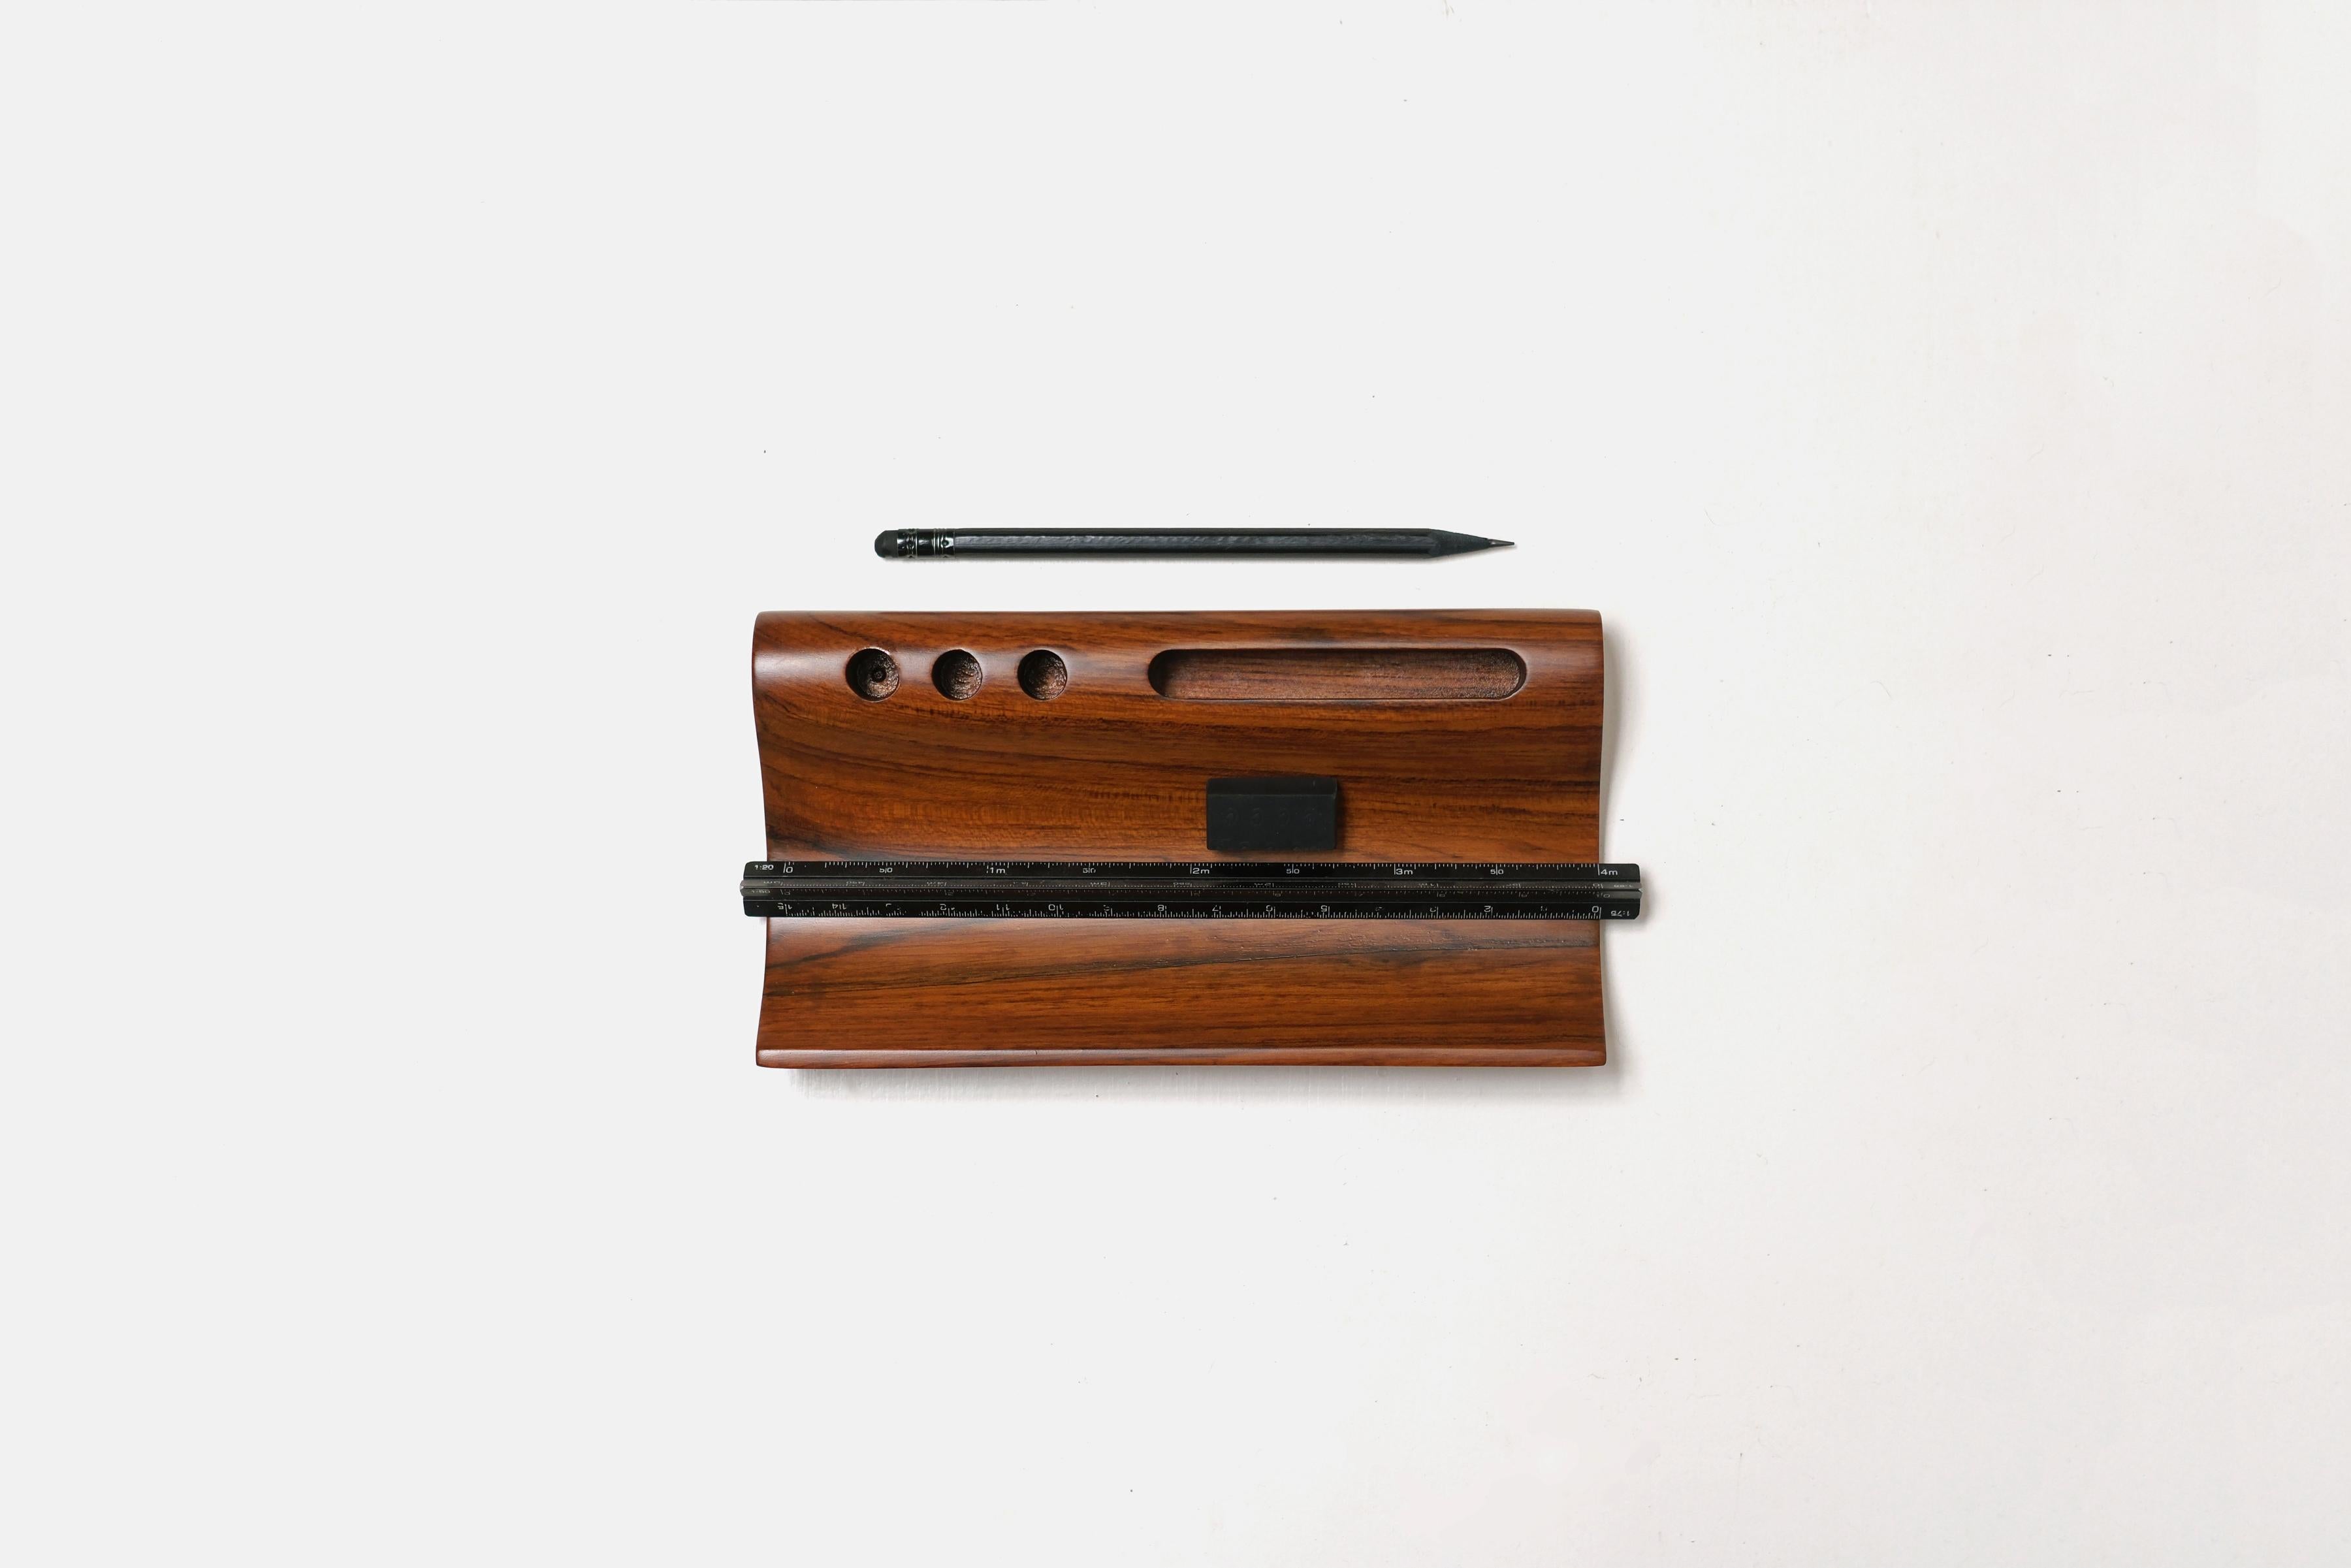 Taksh Stationery Holder by Studio Indigene
Dimensions: D 20.32 x W 11.43 x H 3.71 cm
Materials: Reclaimed Teak Wood.
Colors Brown, Natural Wooden Finish.

The Taksh Stationery Holder neatly organizes pens and stationery for a tasteful desk